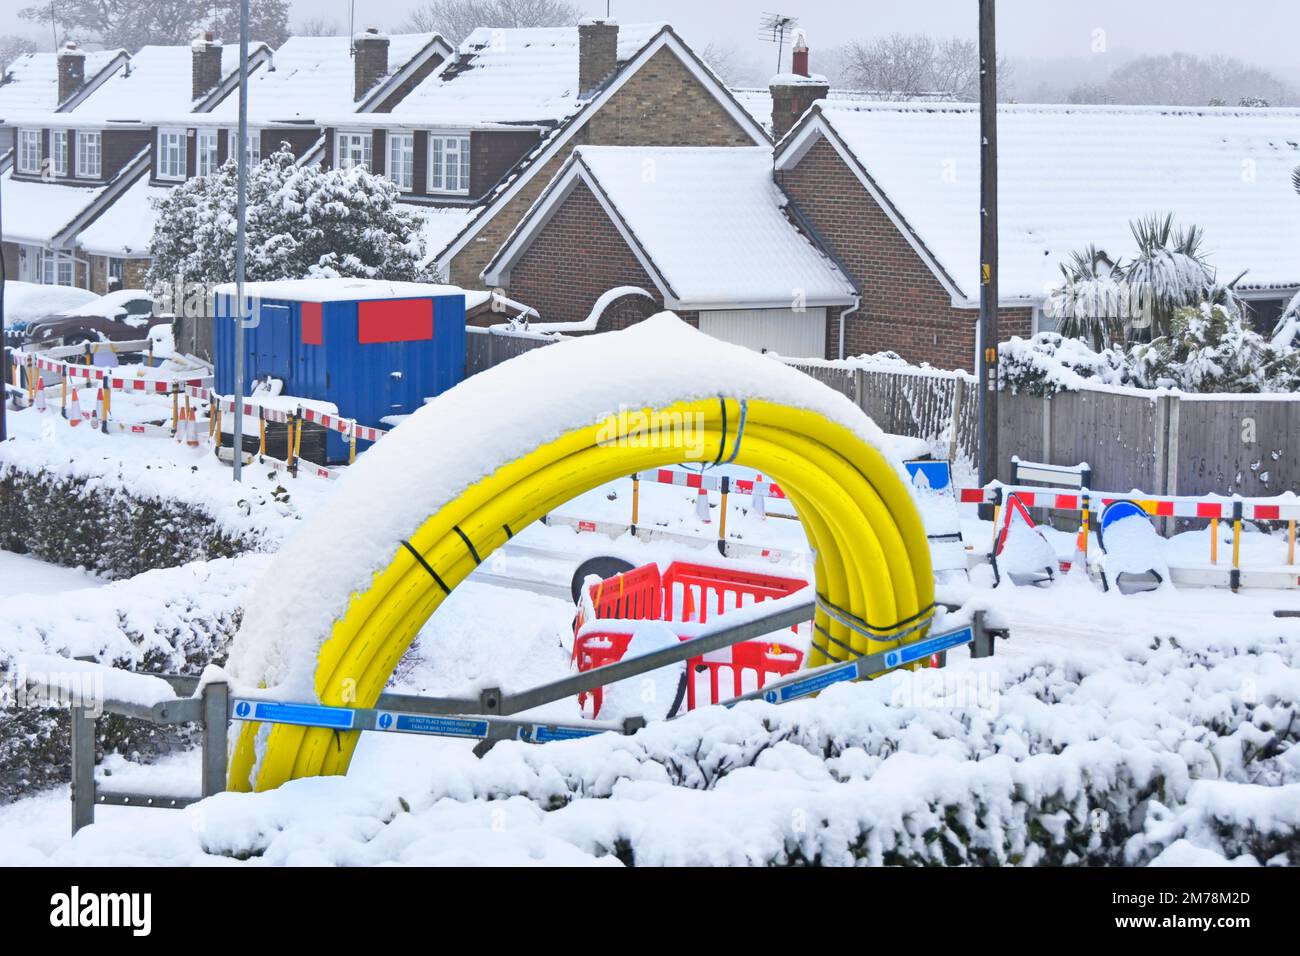 December snowfall & ice stop road work on village underground infrastructure replacement project snow on coiled up yellow plastic gas main pipe in UK Stock Photo